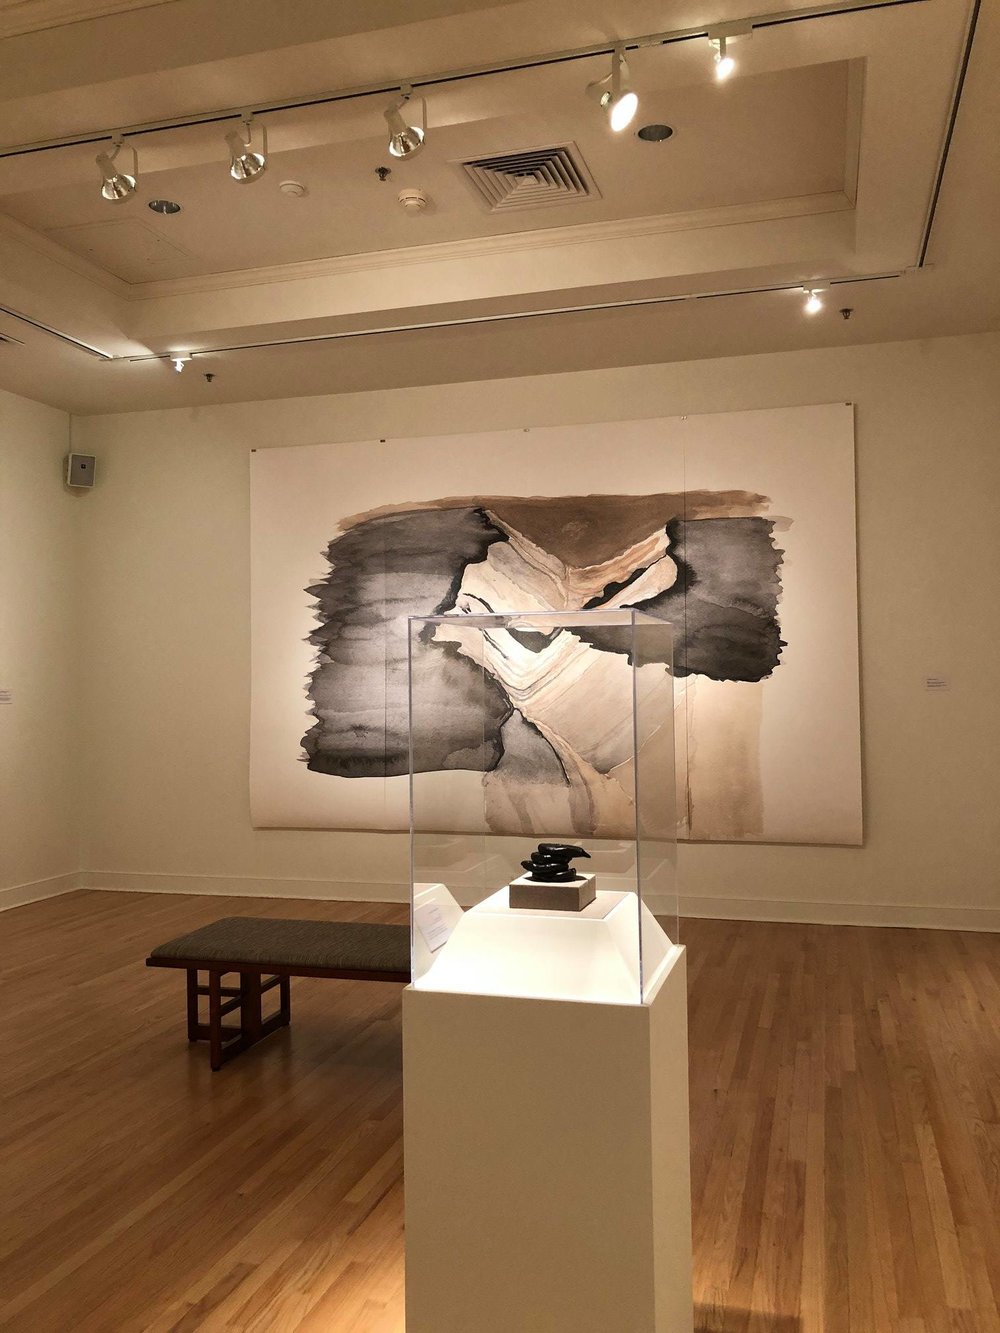   Maria Chavez,&nbsp;  Topography of Sound: Peaks and Valleys Series,&nbsp; Installation view, 2018  Image courtesy of the artist and University of Richmond Museums&nbsp; 